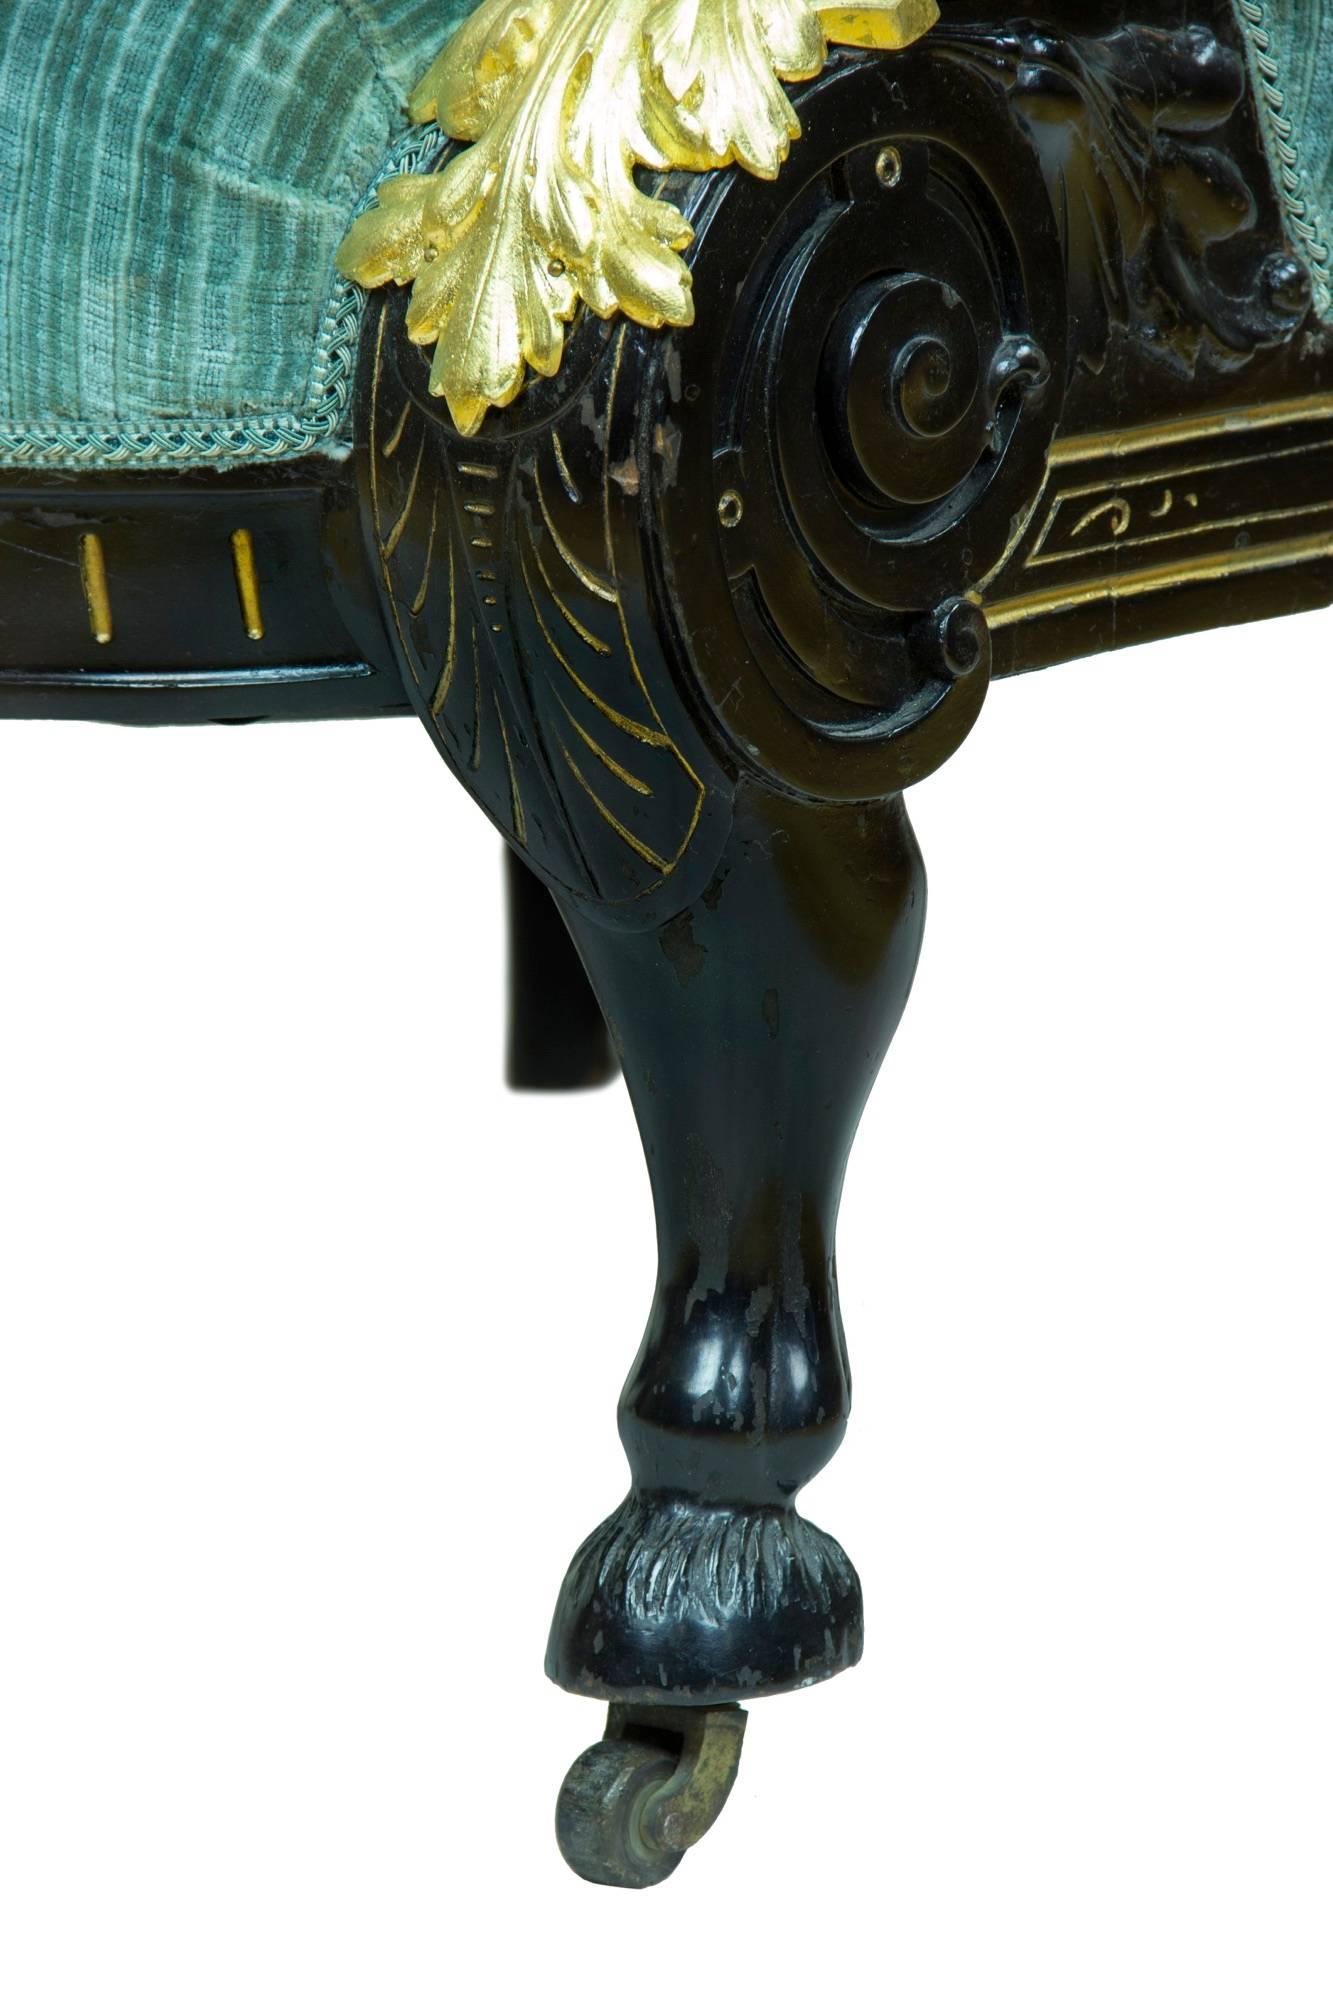 19th Century Renaissance Revival Gilt-Metal, Ebonized and Inlaid Rosewood Set of Four Chairs